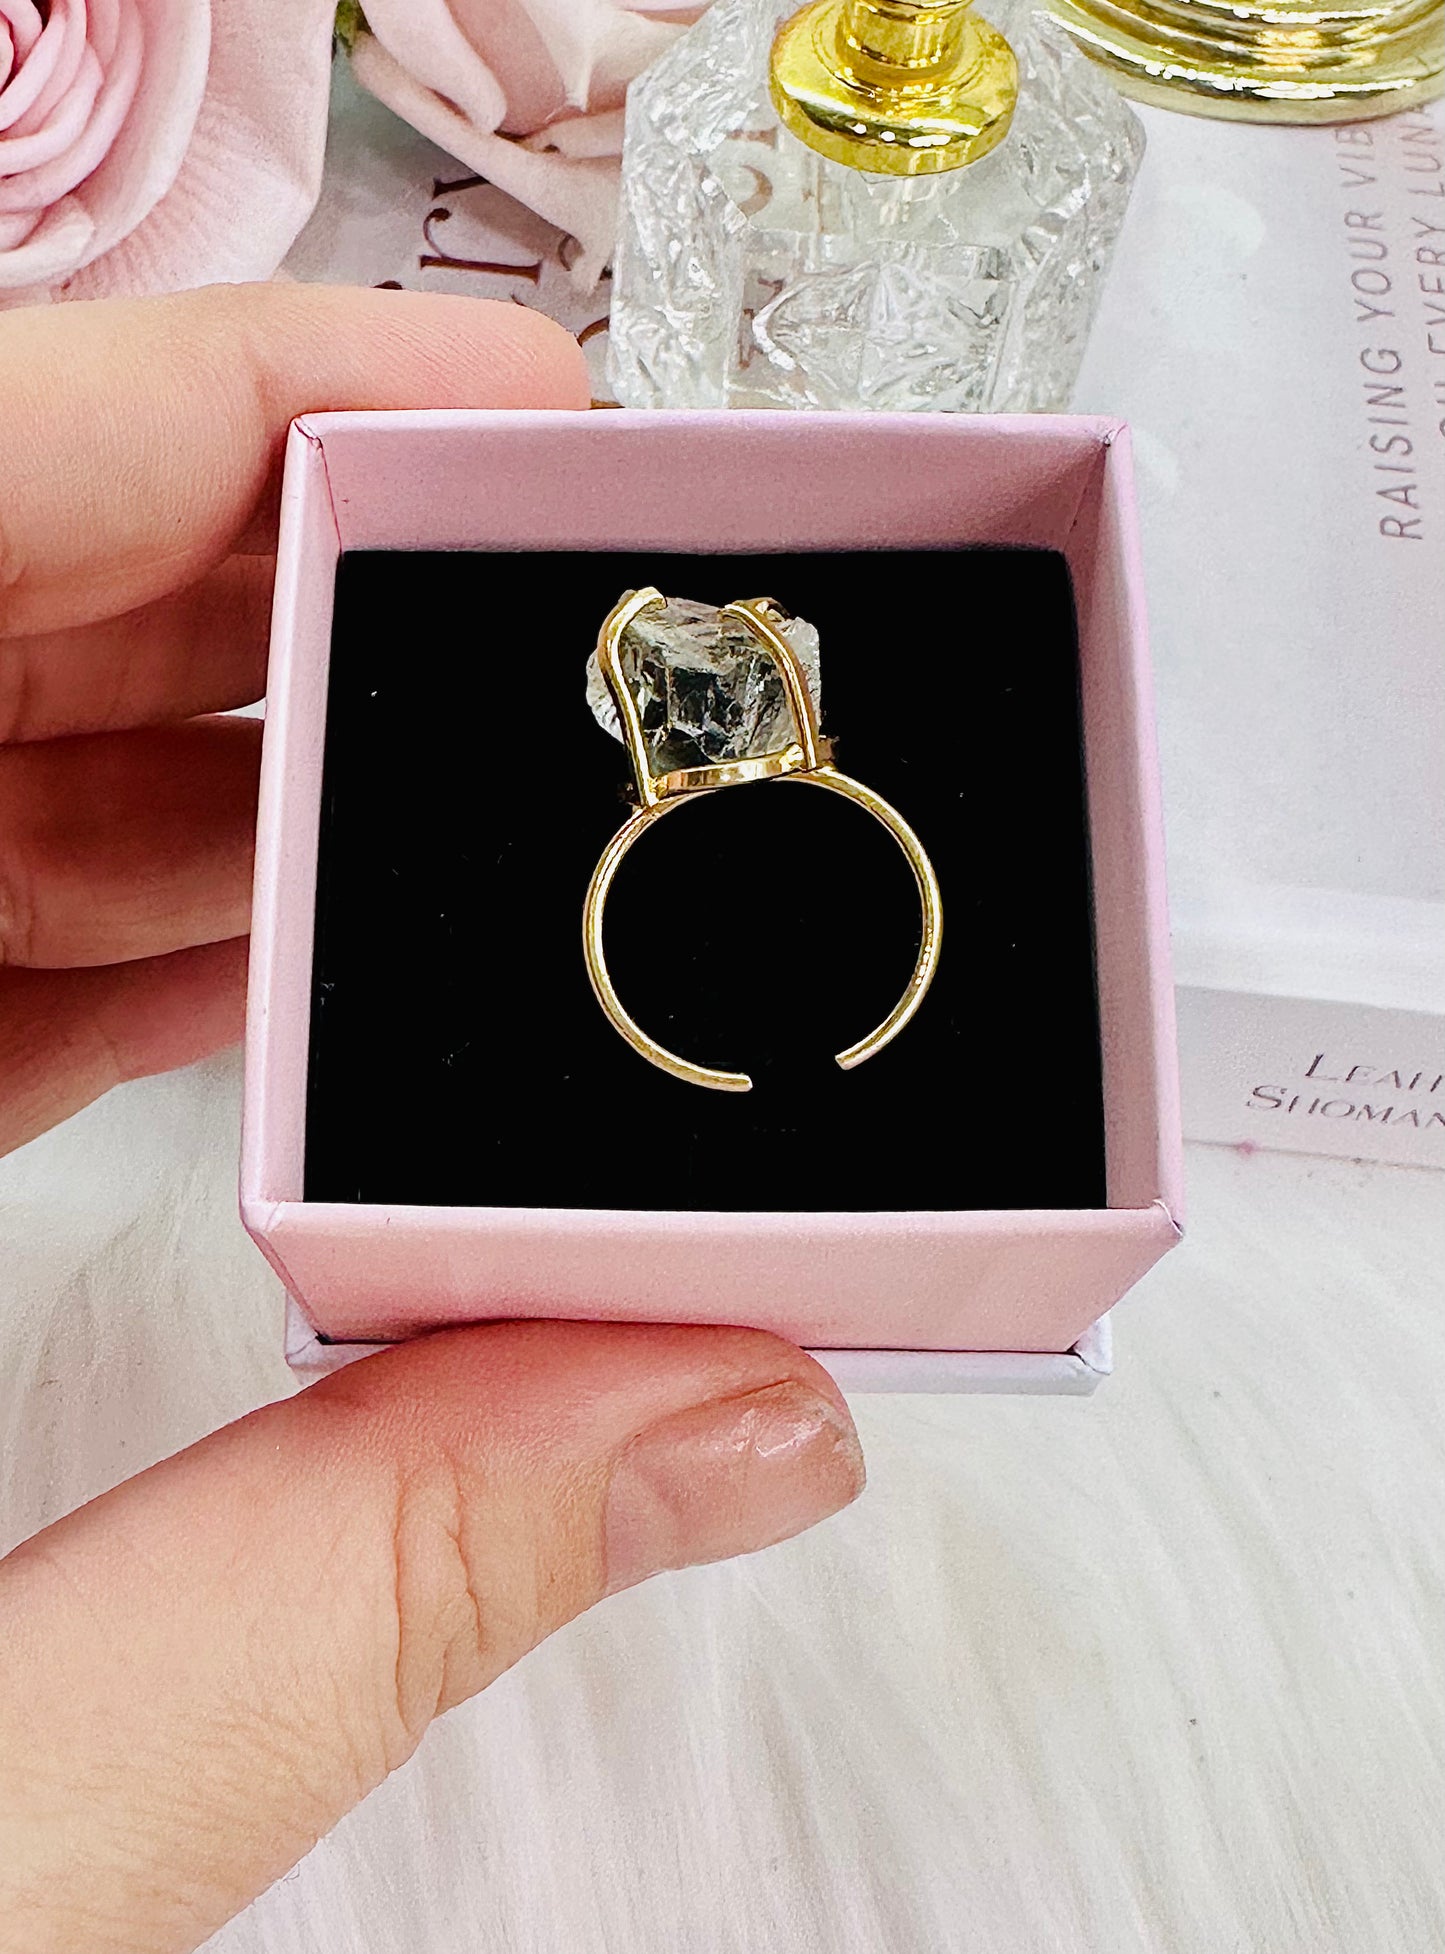 Gift Boxed - Gorgeous chunky high grade, green amethyst adjustable ring from Brazil